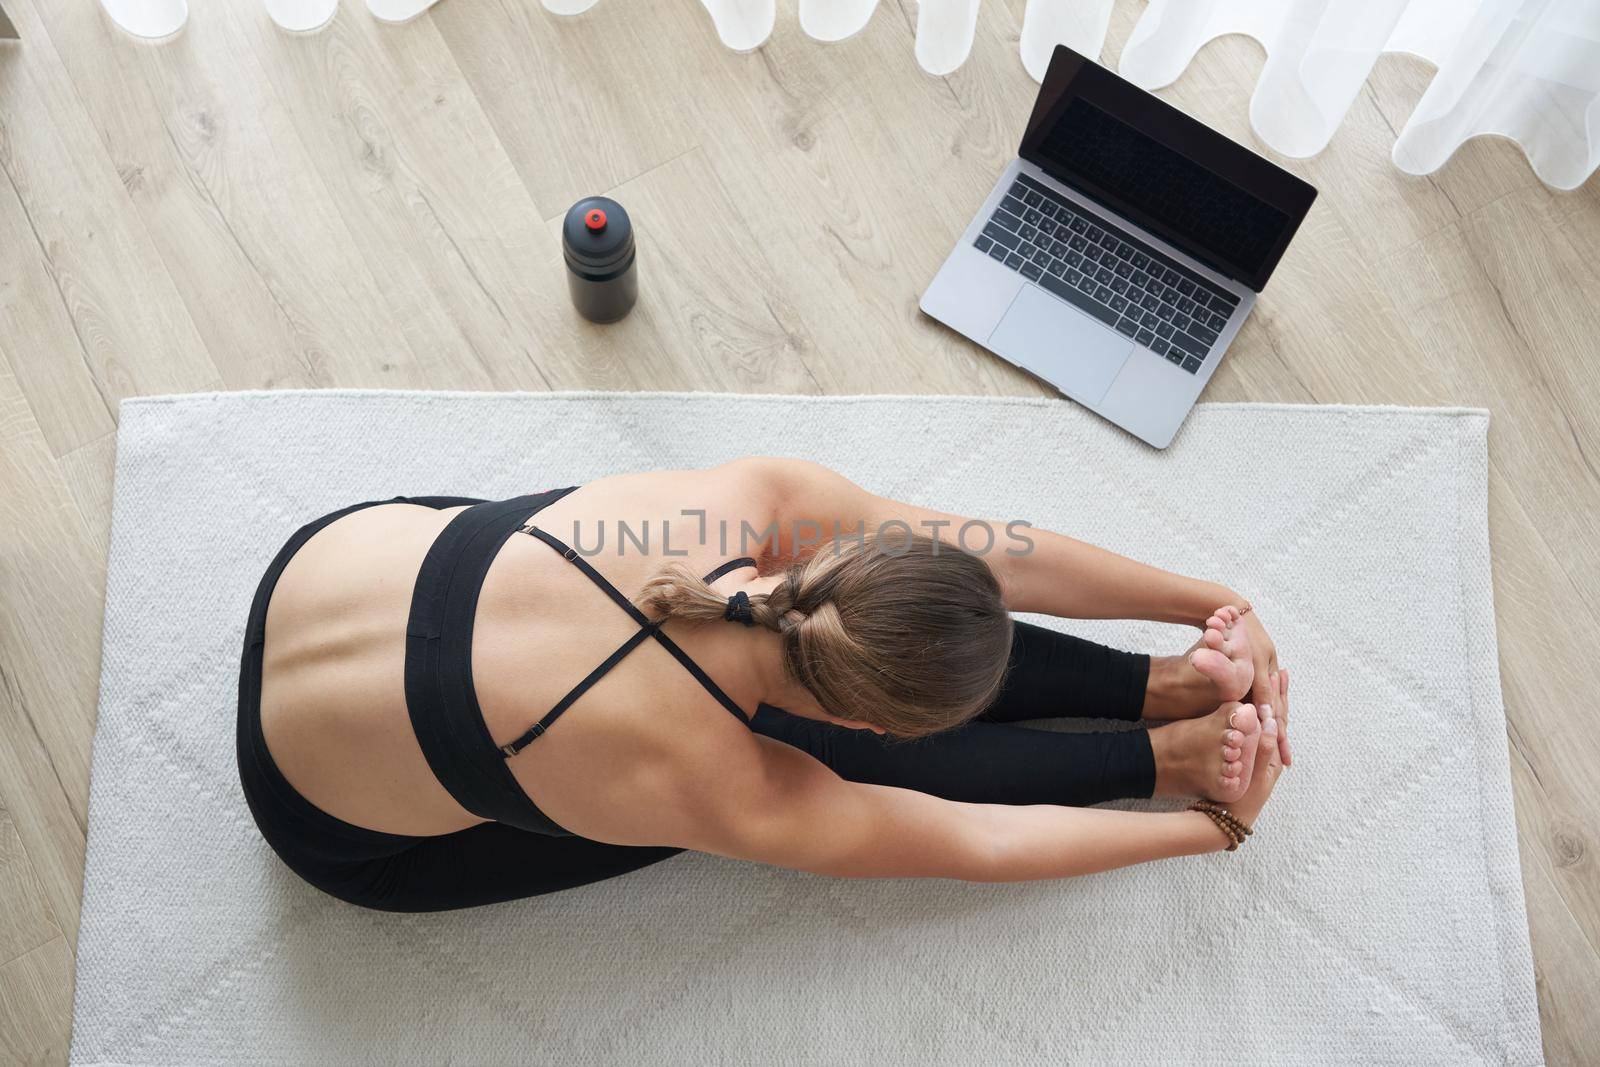 Yoga paschimottanasana forward bend pose by young woman. Young yogi practice yoga poses relaxing in studio with laptop